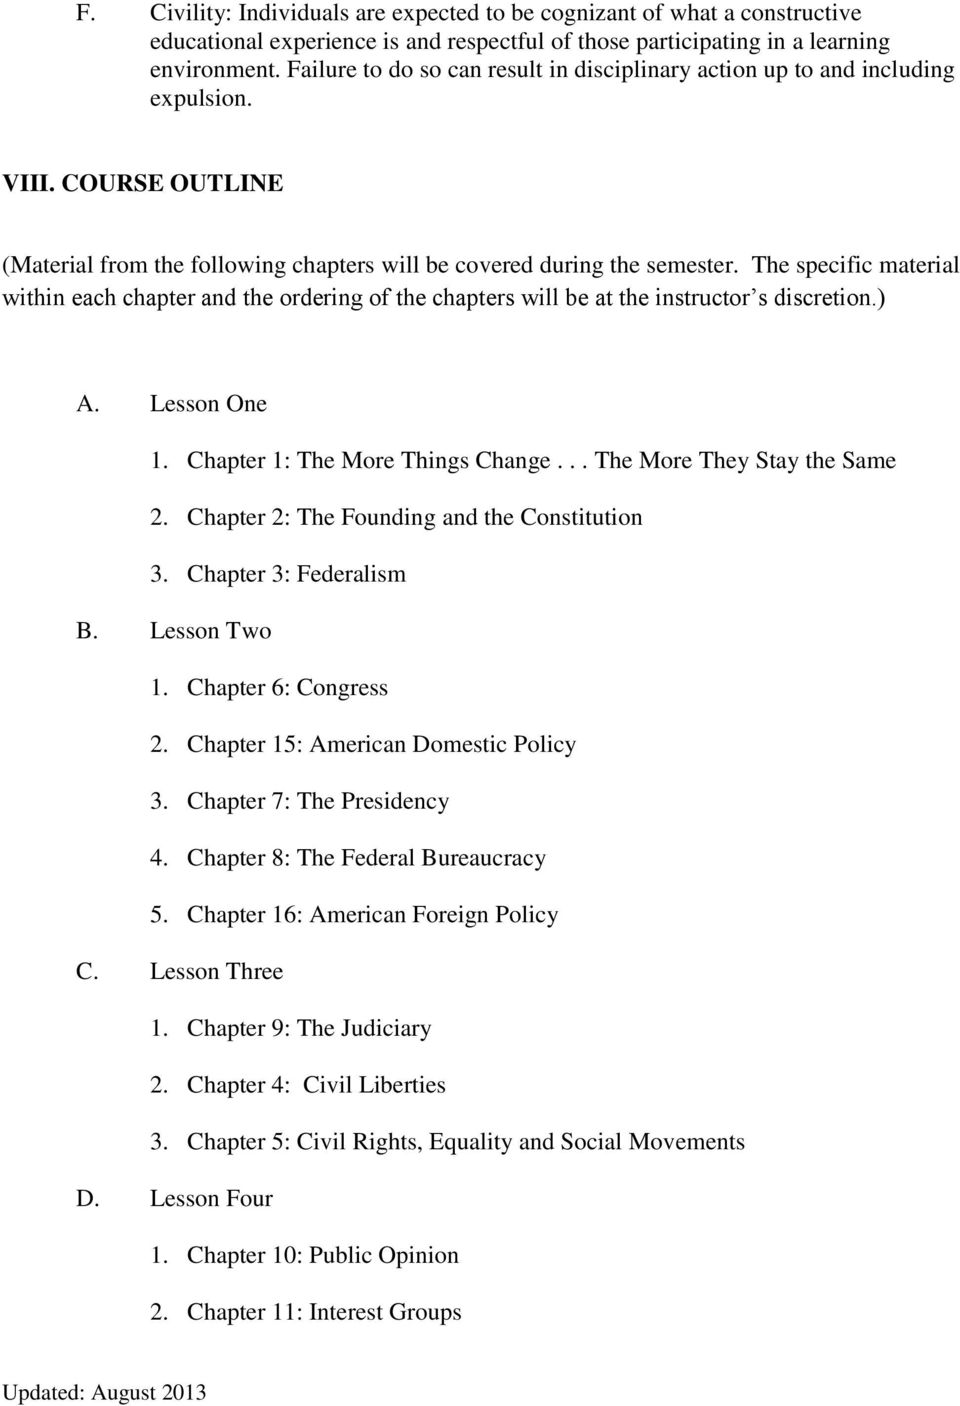 The specific material within each chapter and the ordering of the chapters will be at the instructor s discretion.) A. Lesson One 1. Chapter 1: The More Things Change... The More They Stay the Same 2.